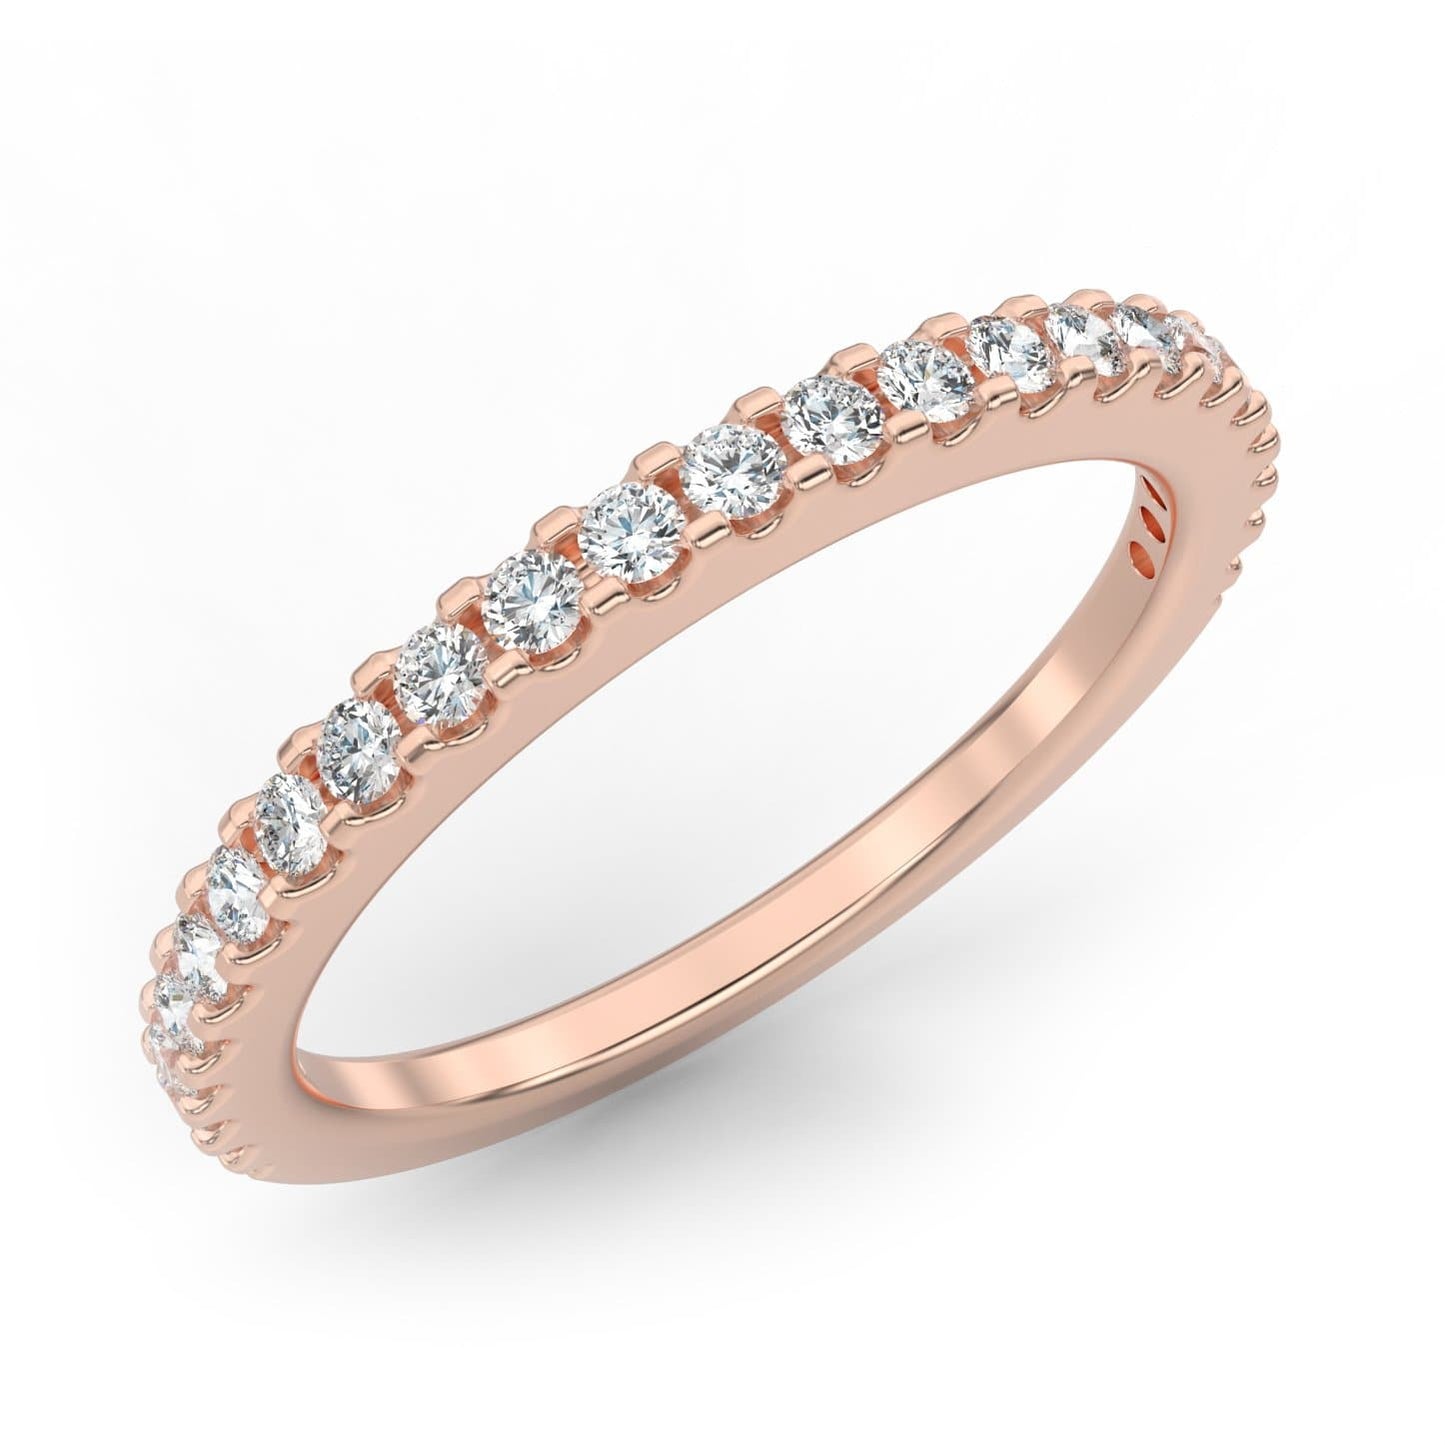 Petite Shared Prong Semi-Eternity Ring in 14k Gold